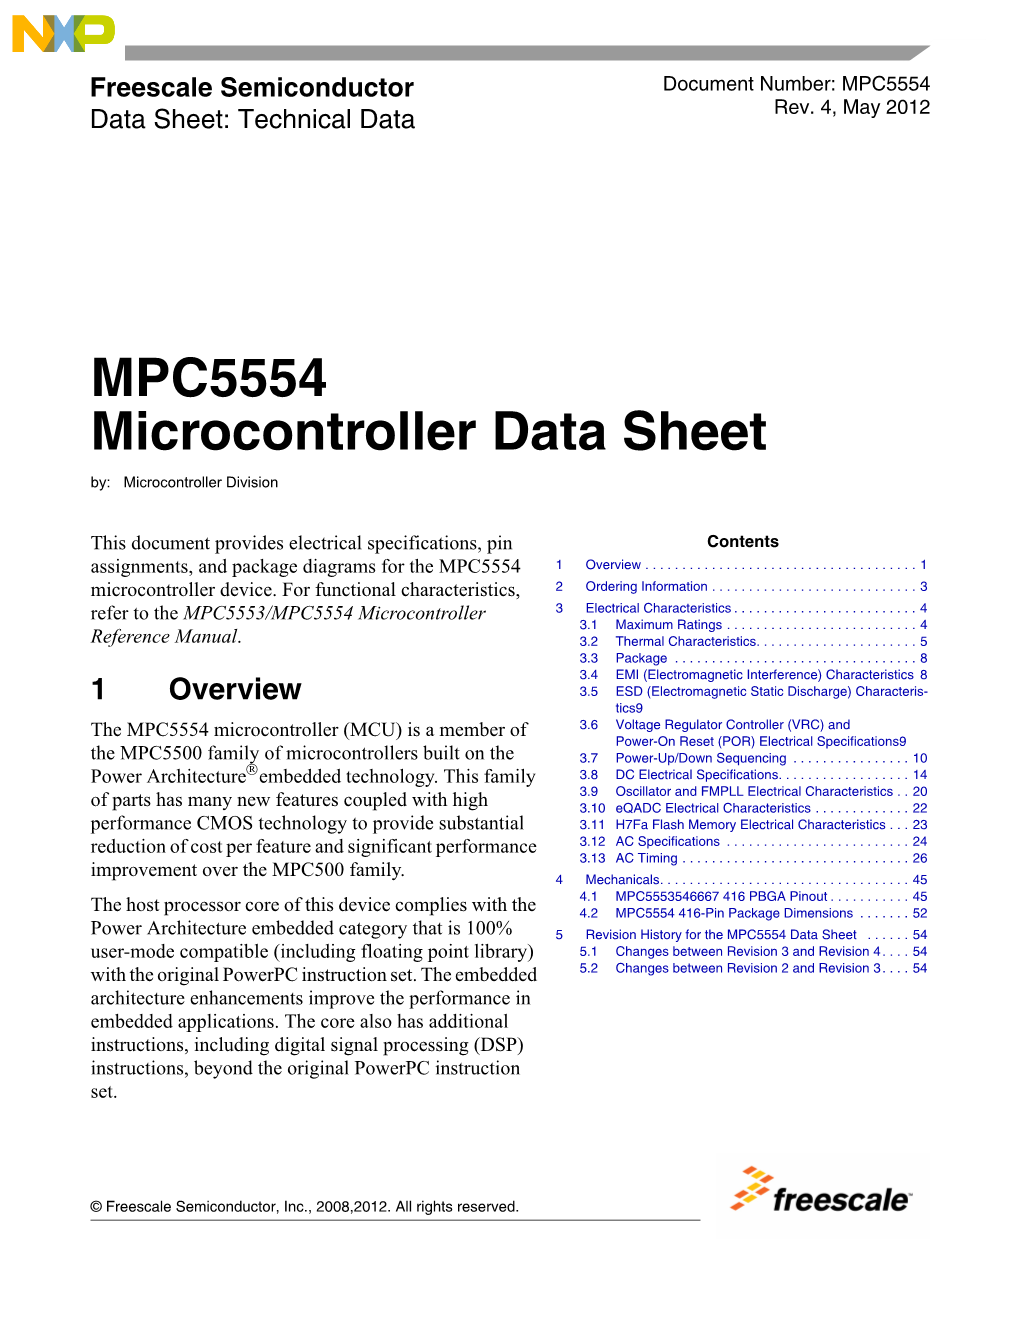 MPC5554 Microcontroller Data Sheet By: Microcontroller Division